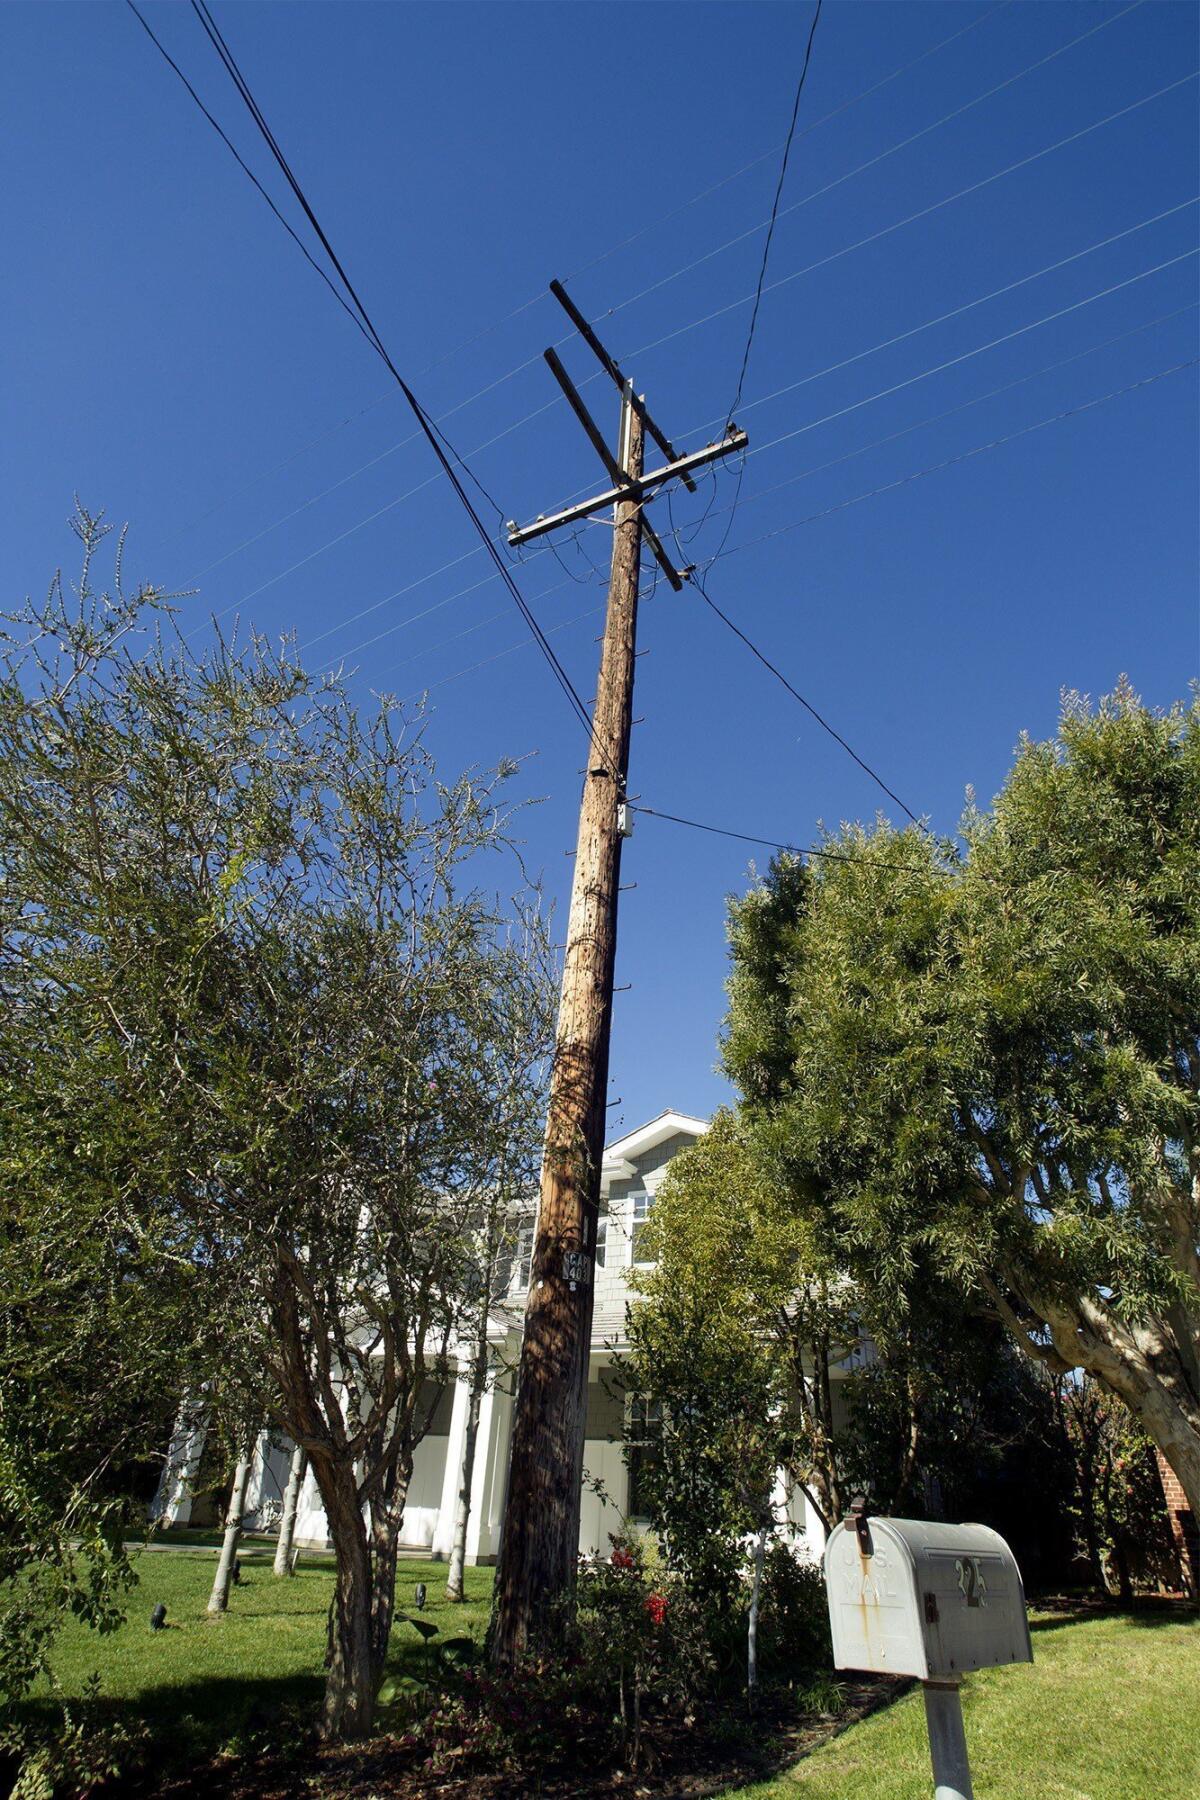 An effort to put utility lines underground in Newport Heights, which pitted neighbors against one another for more than a year, has been defeated.